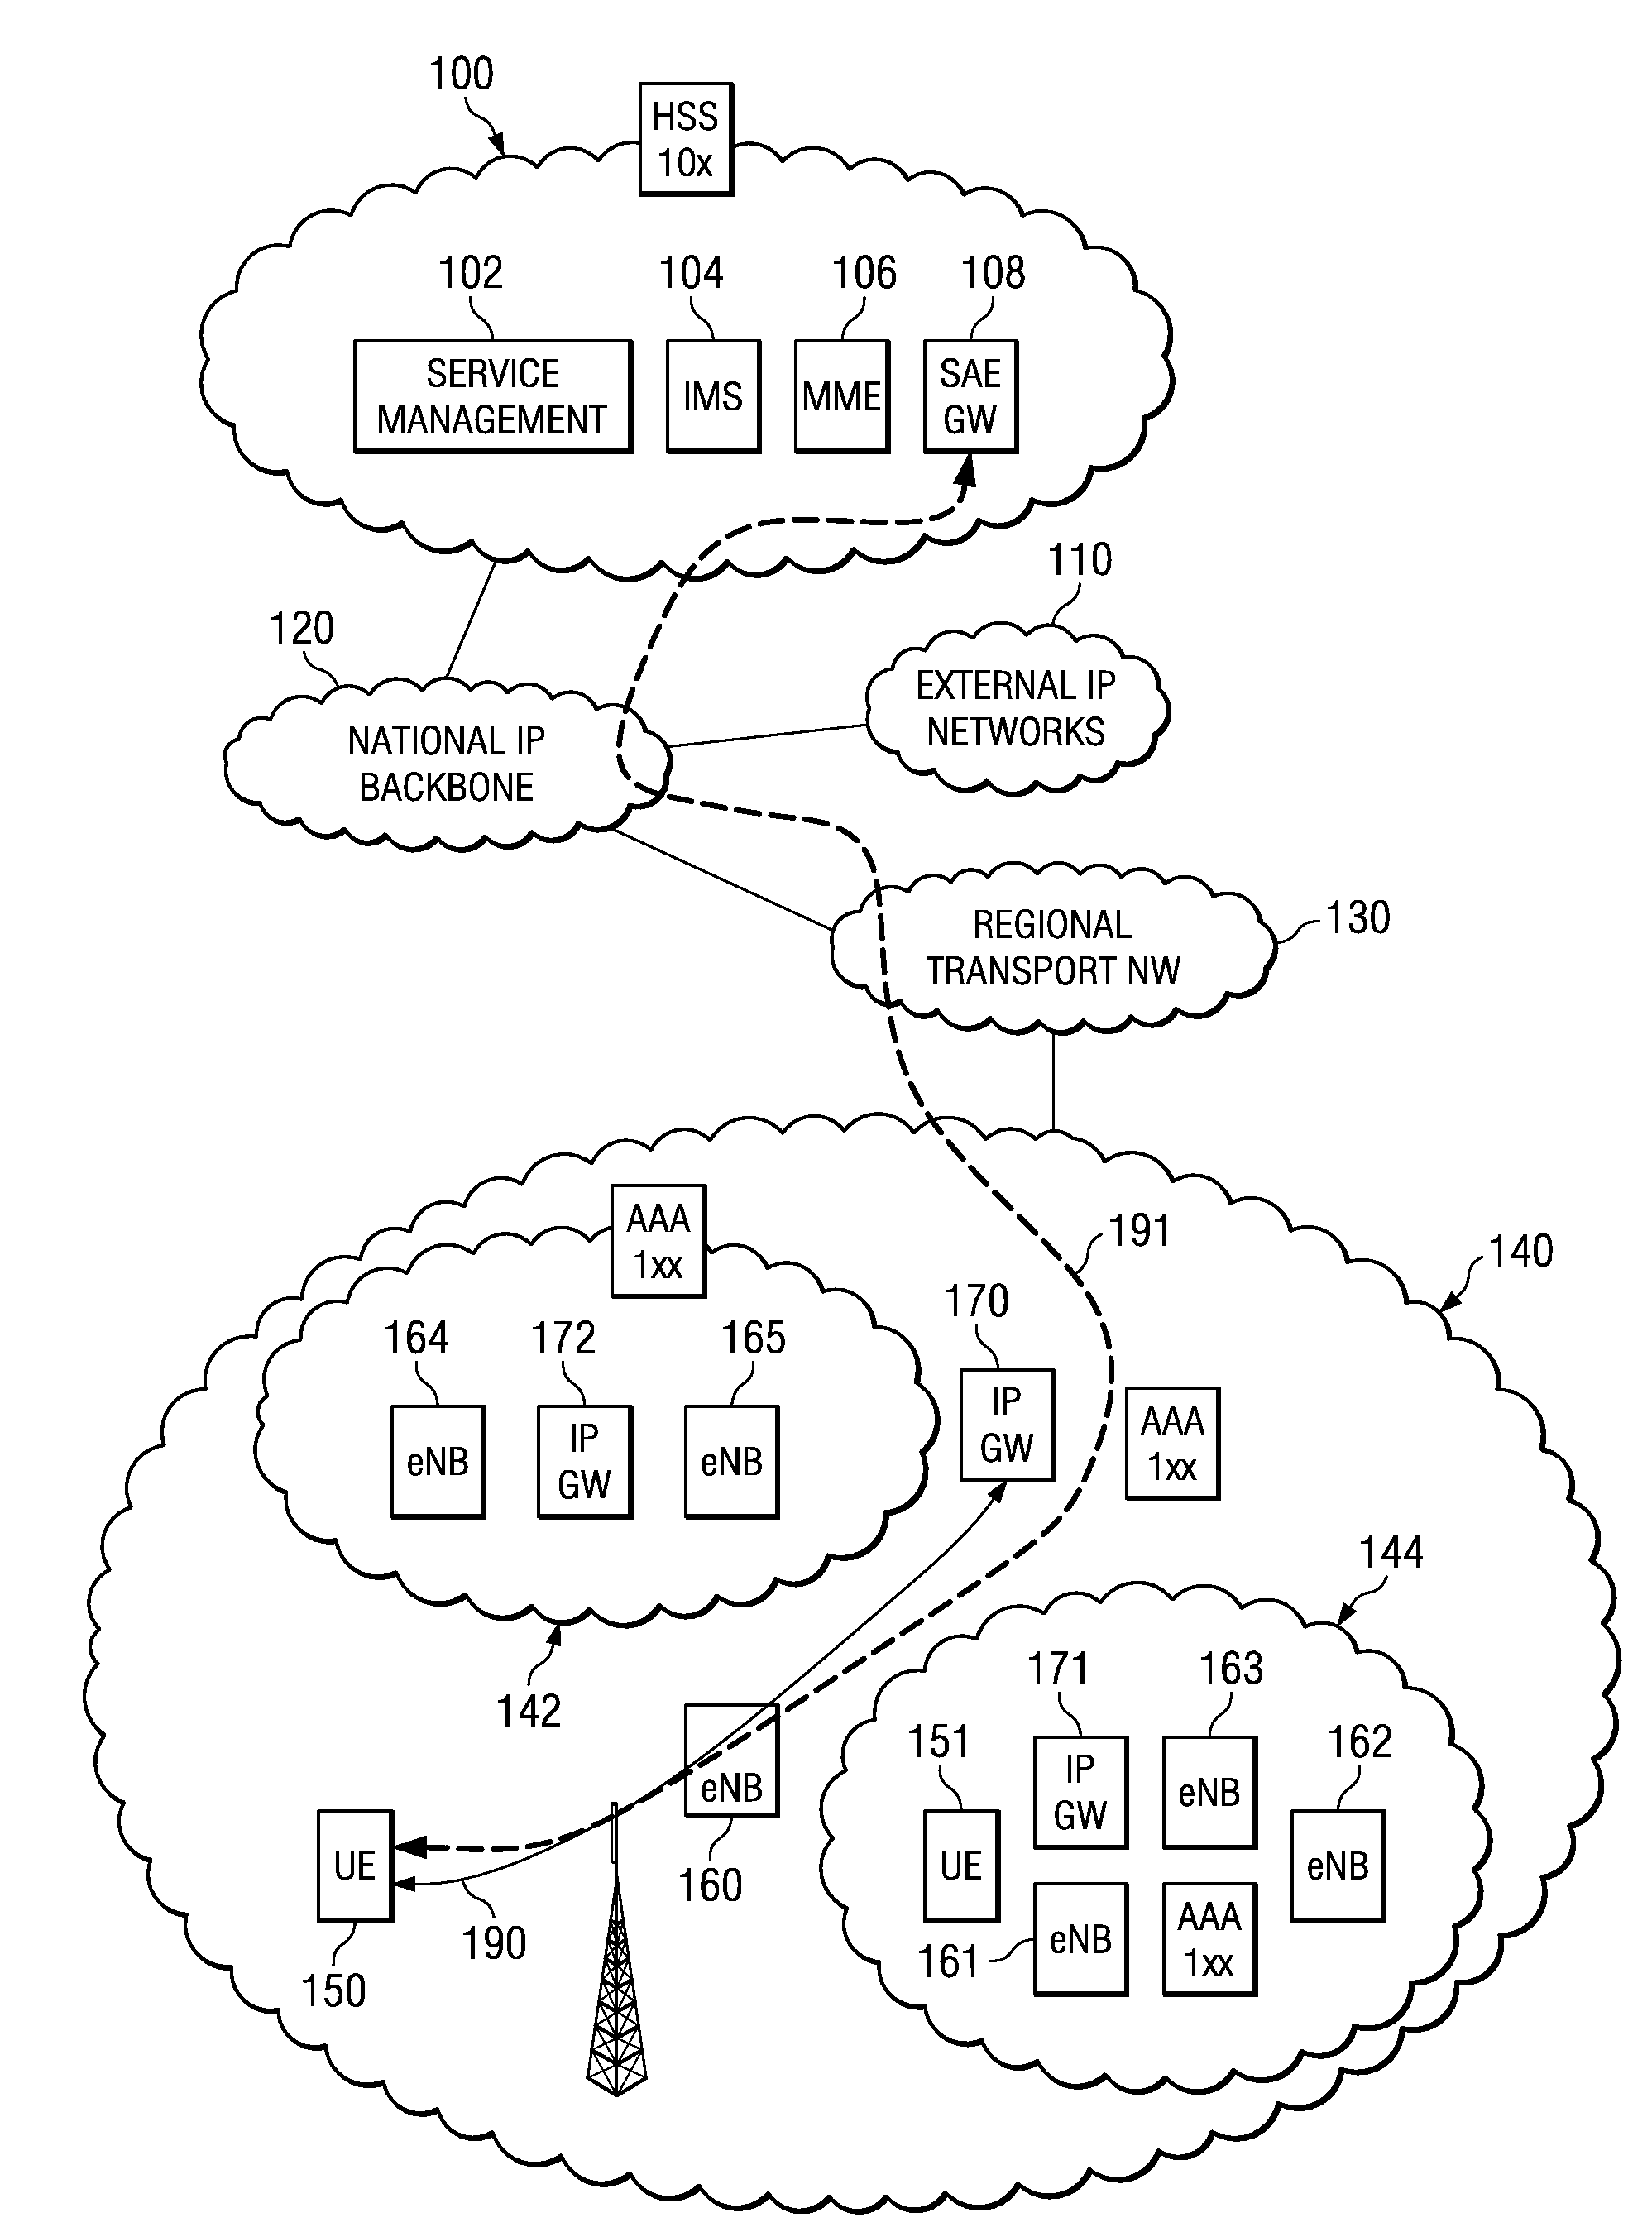 System and Method for Providing Local IP Breakout Services Employing Access Point Names